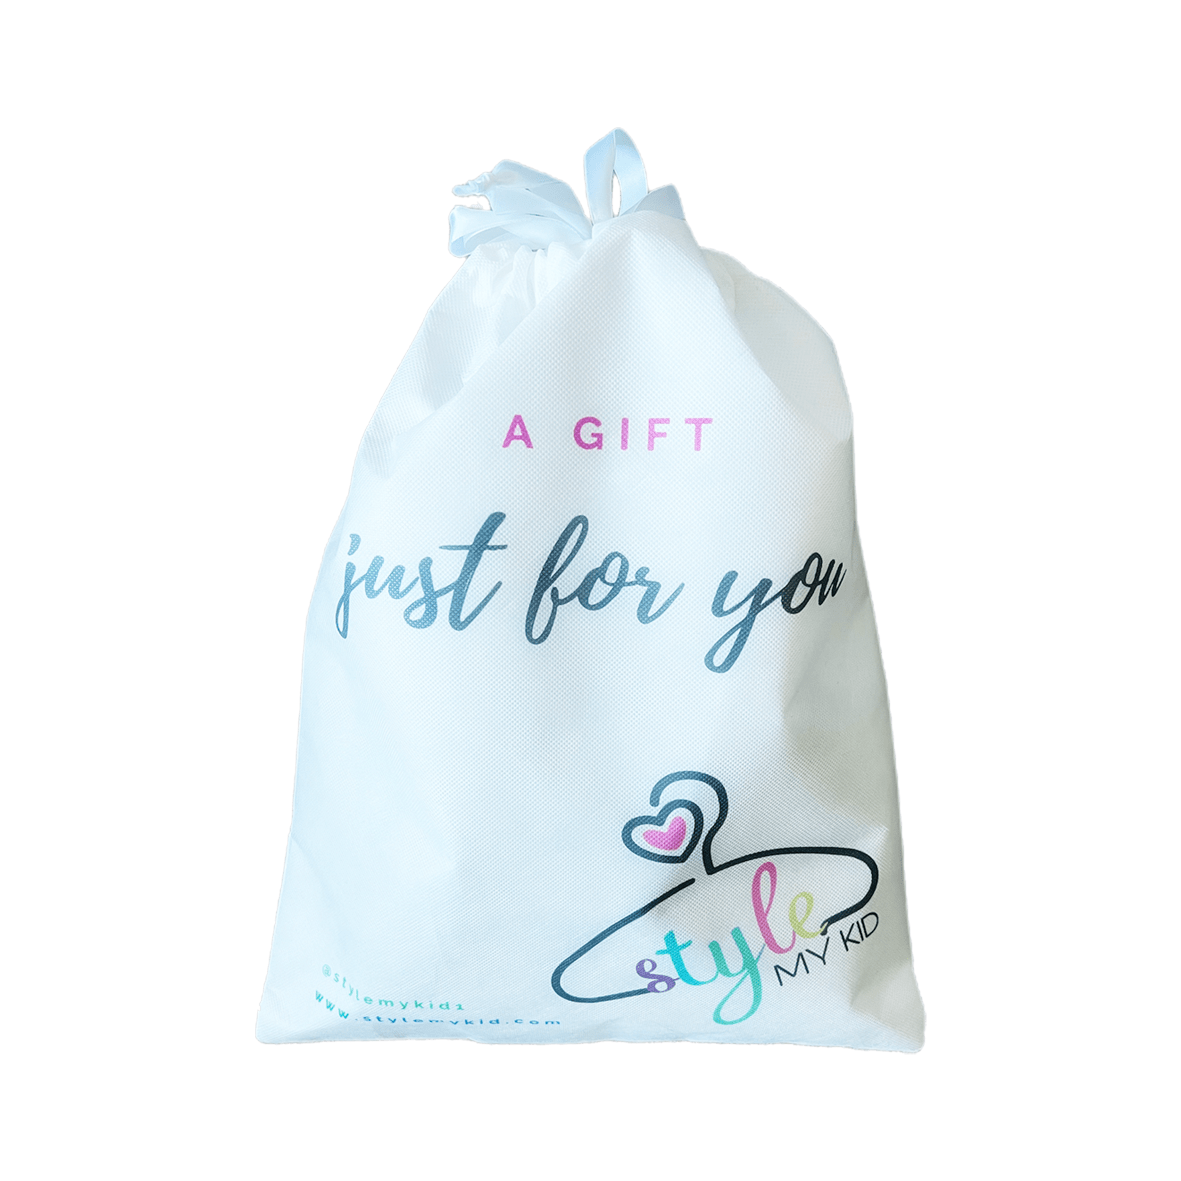 Gift Bag & Gift Message - Stylemykid.com